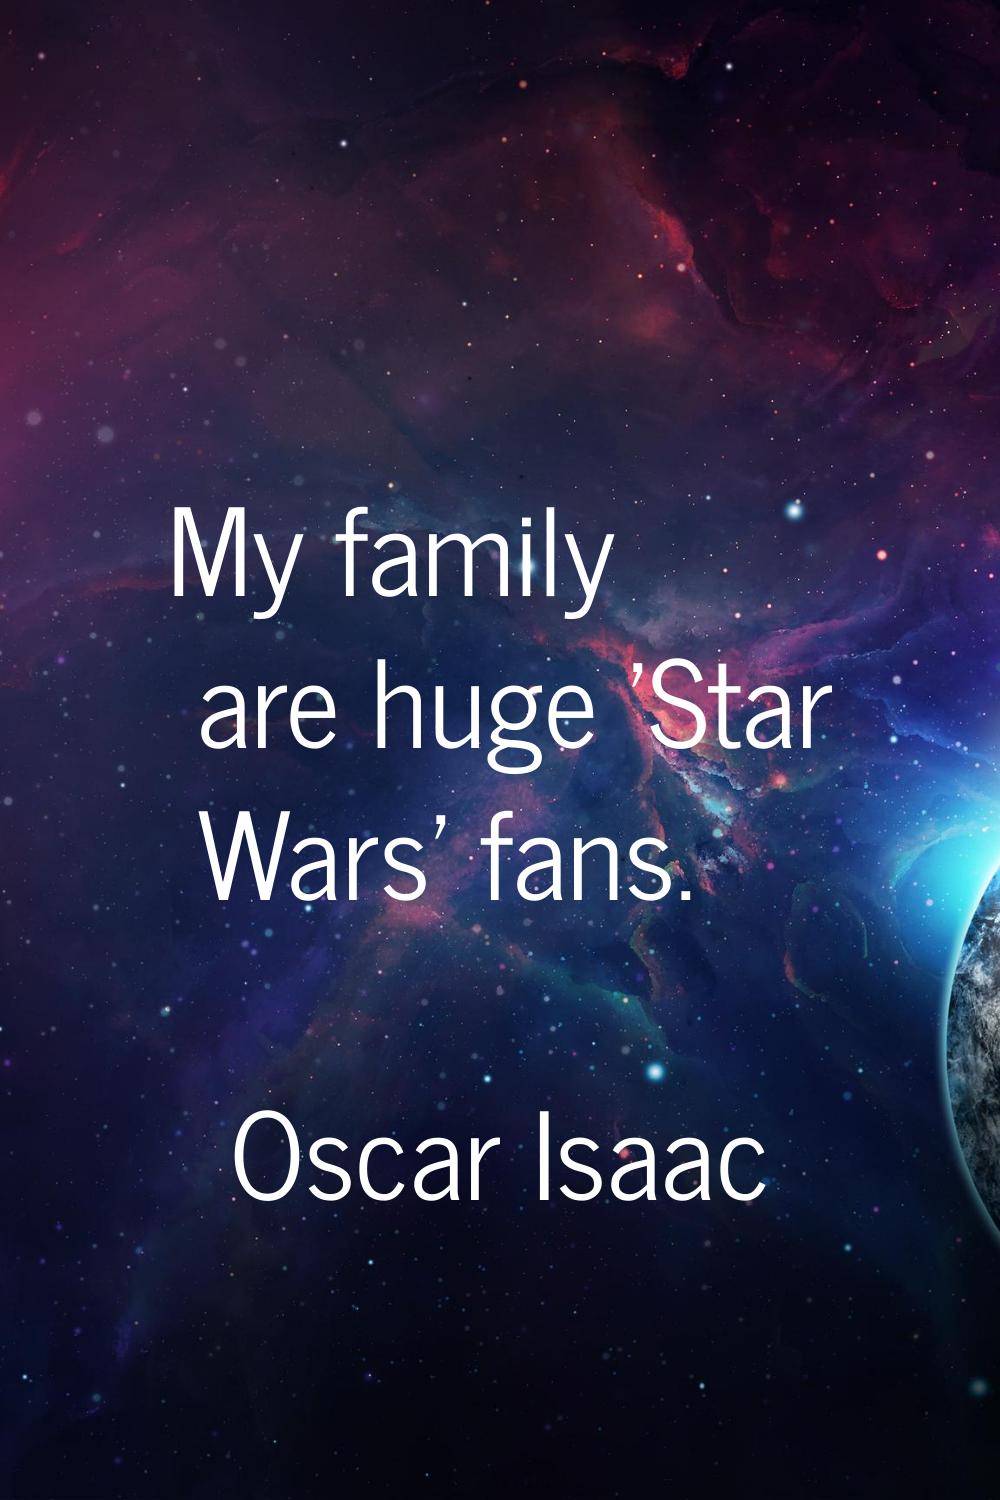 My family are huge 'Star Wars' fans.